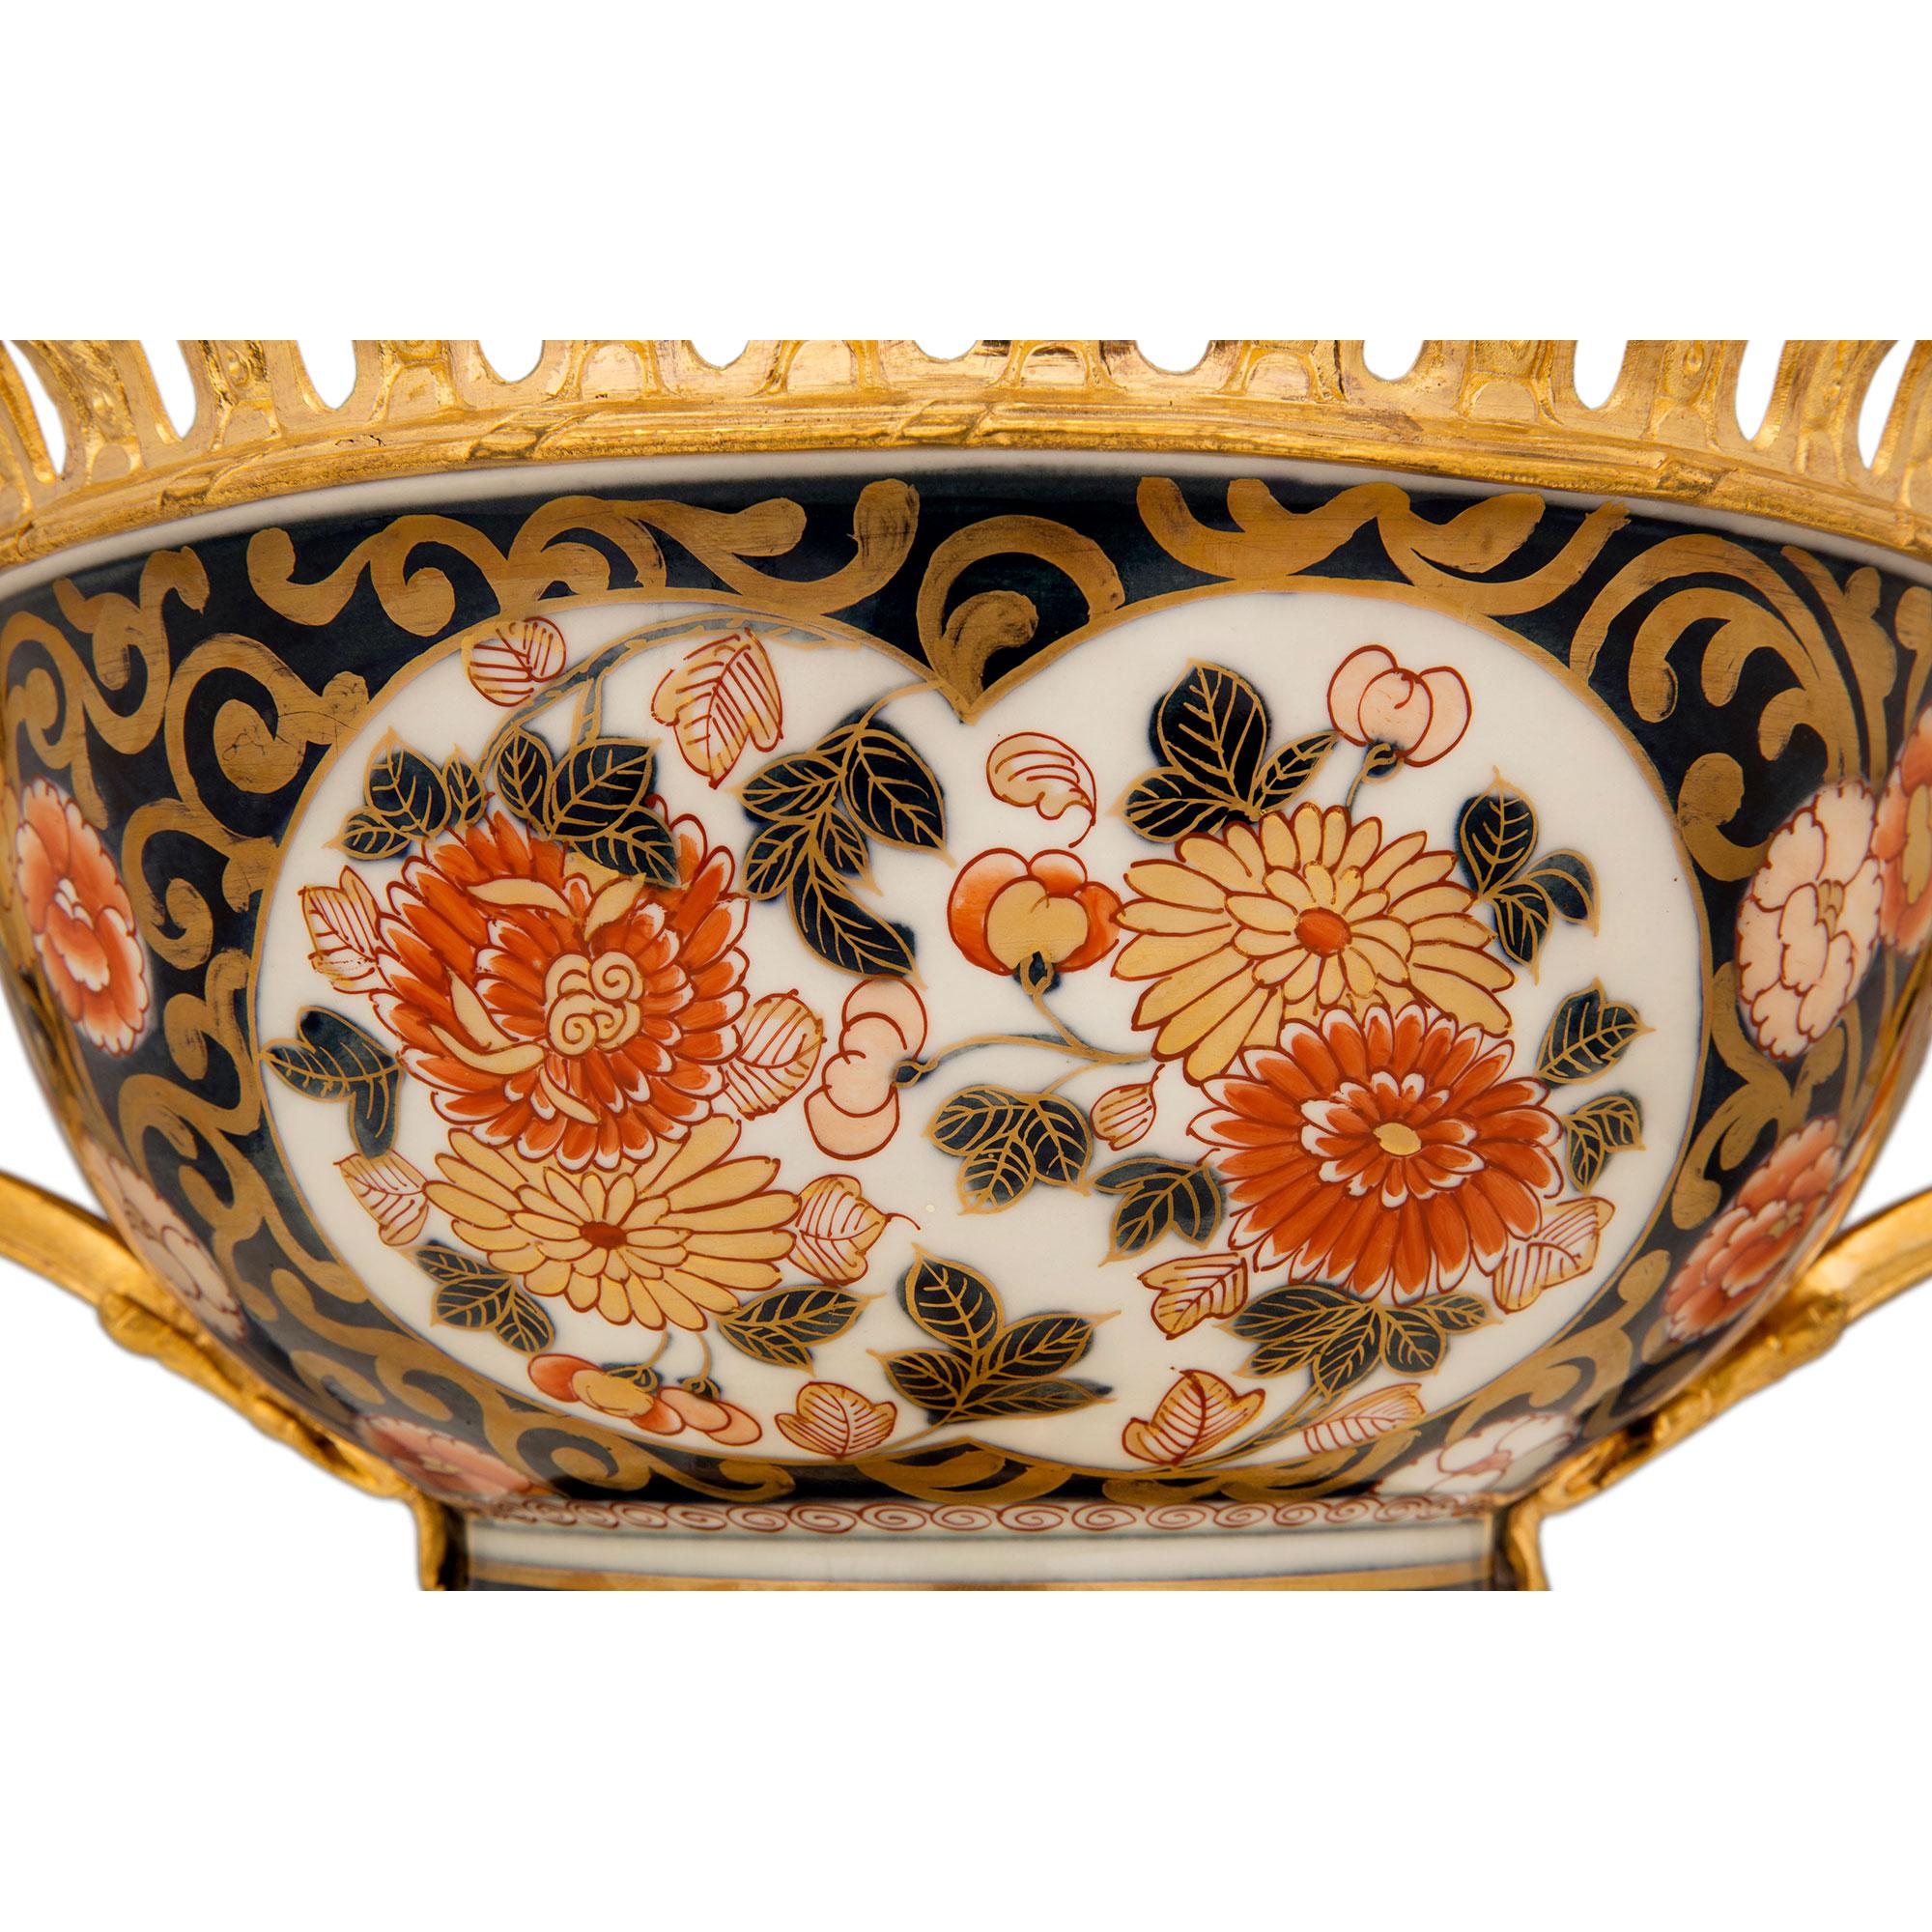 French and Asian Collaboration 19th Century Louis XVI Style Centerpiece Bowl For Sale 2